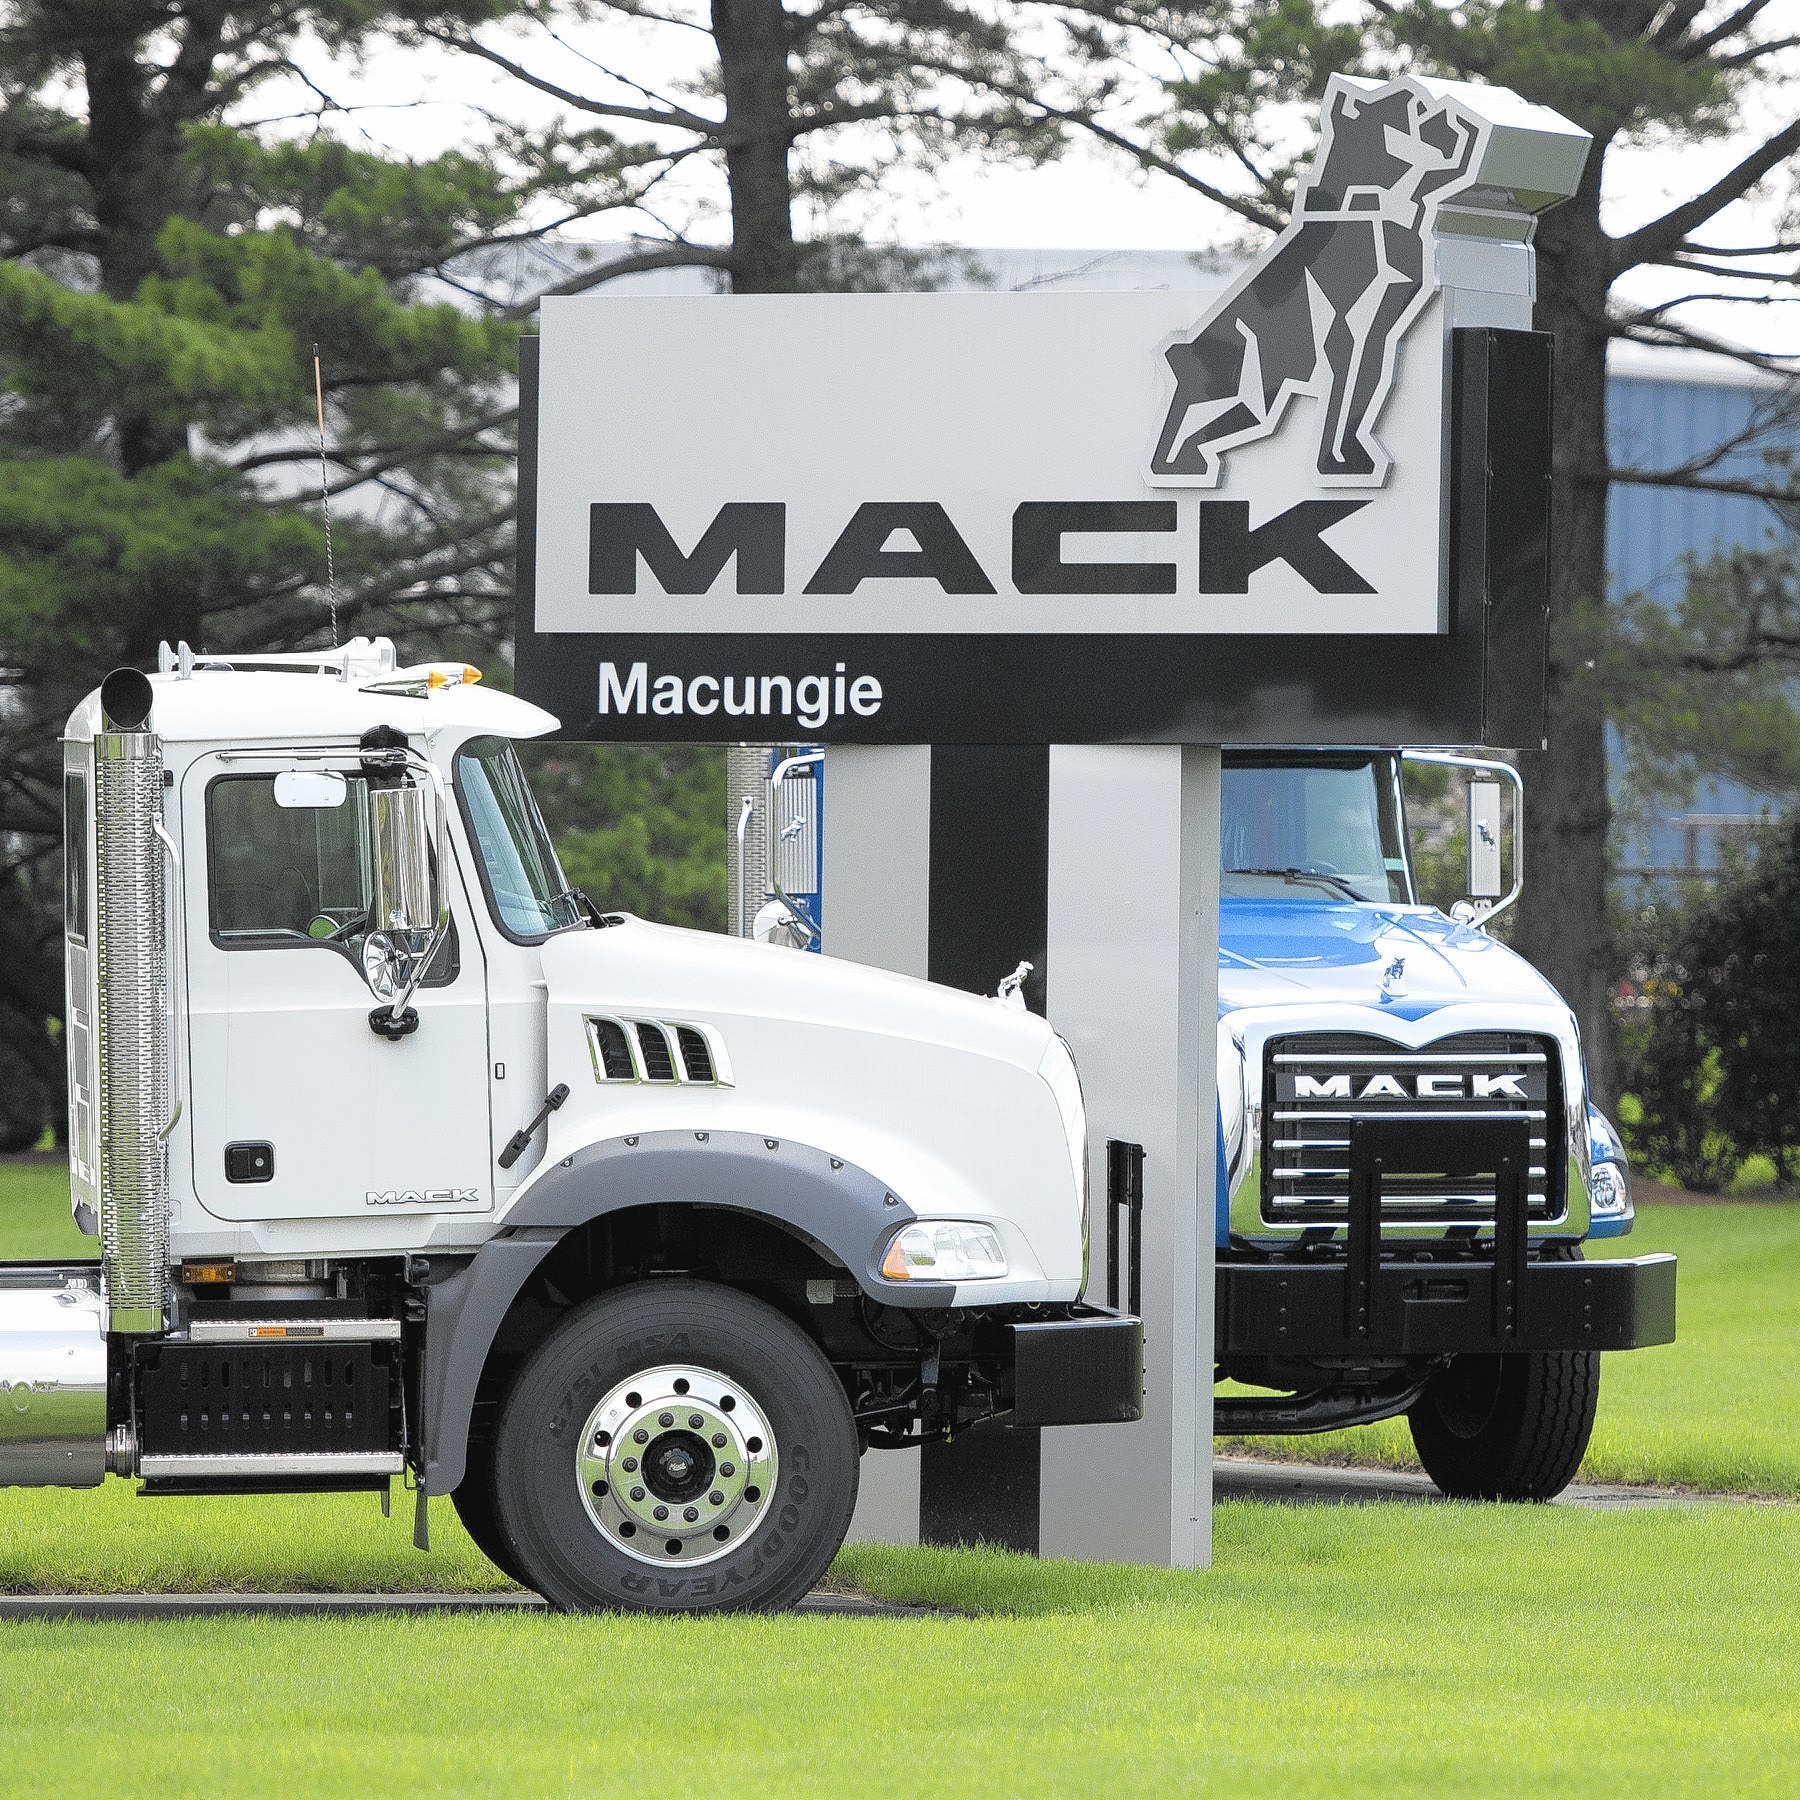 Union chief: Job cuts coming to Mack Trucks  Lehigh Valley Business Cycle